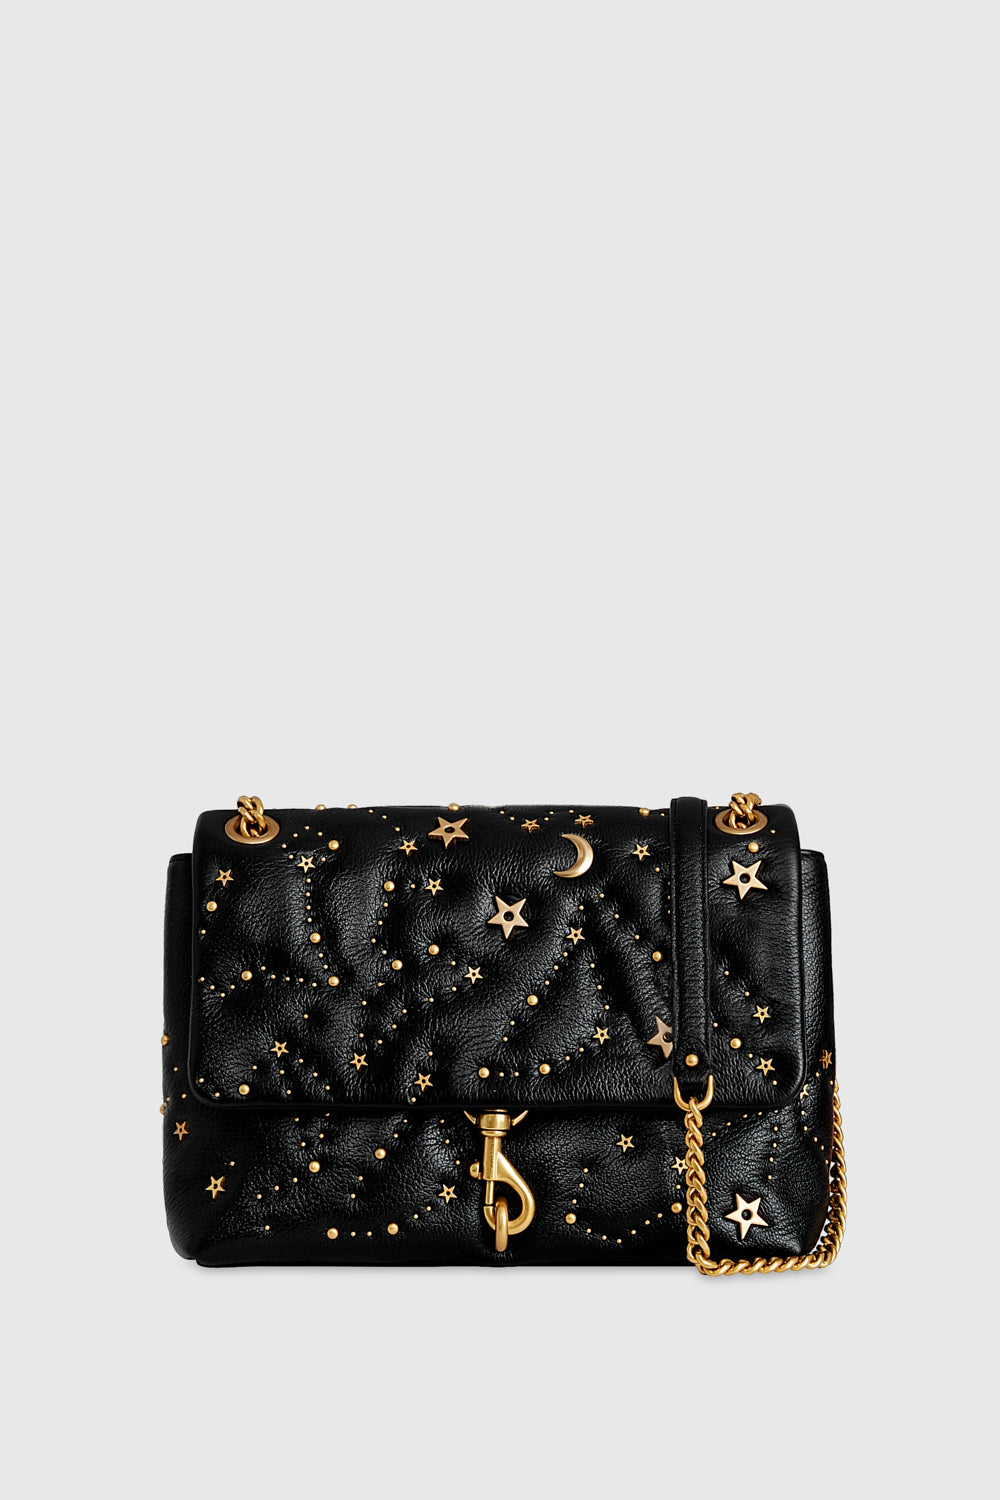 Edie Flap Shoulder with Celestial Studs